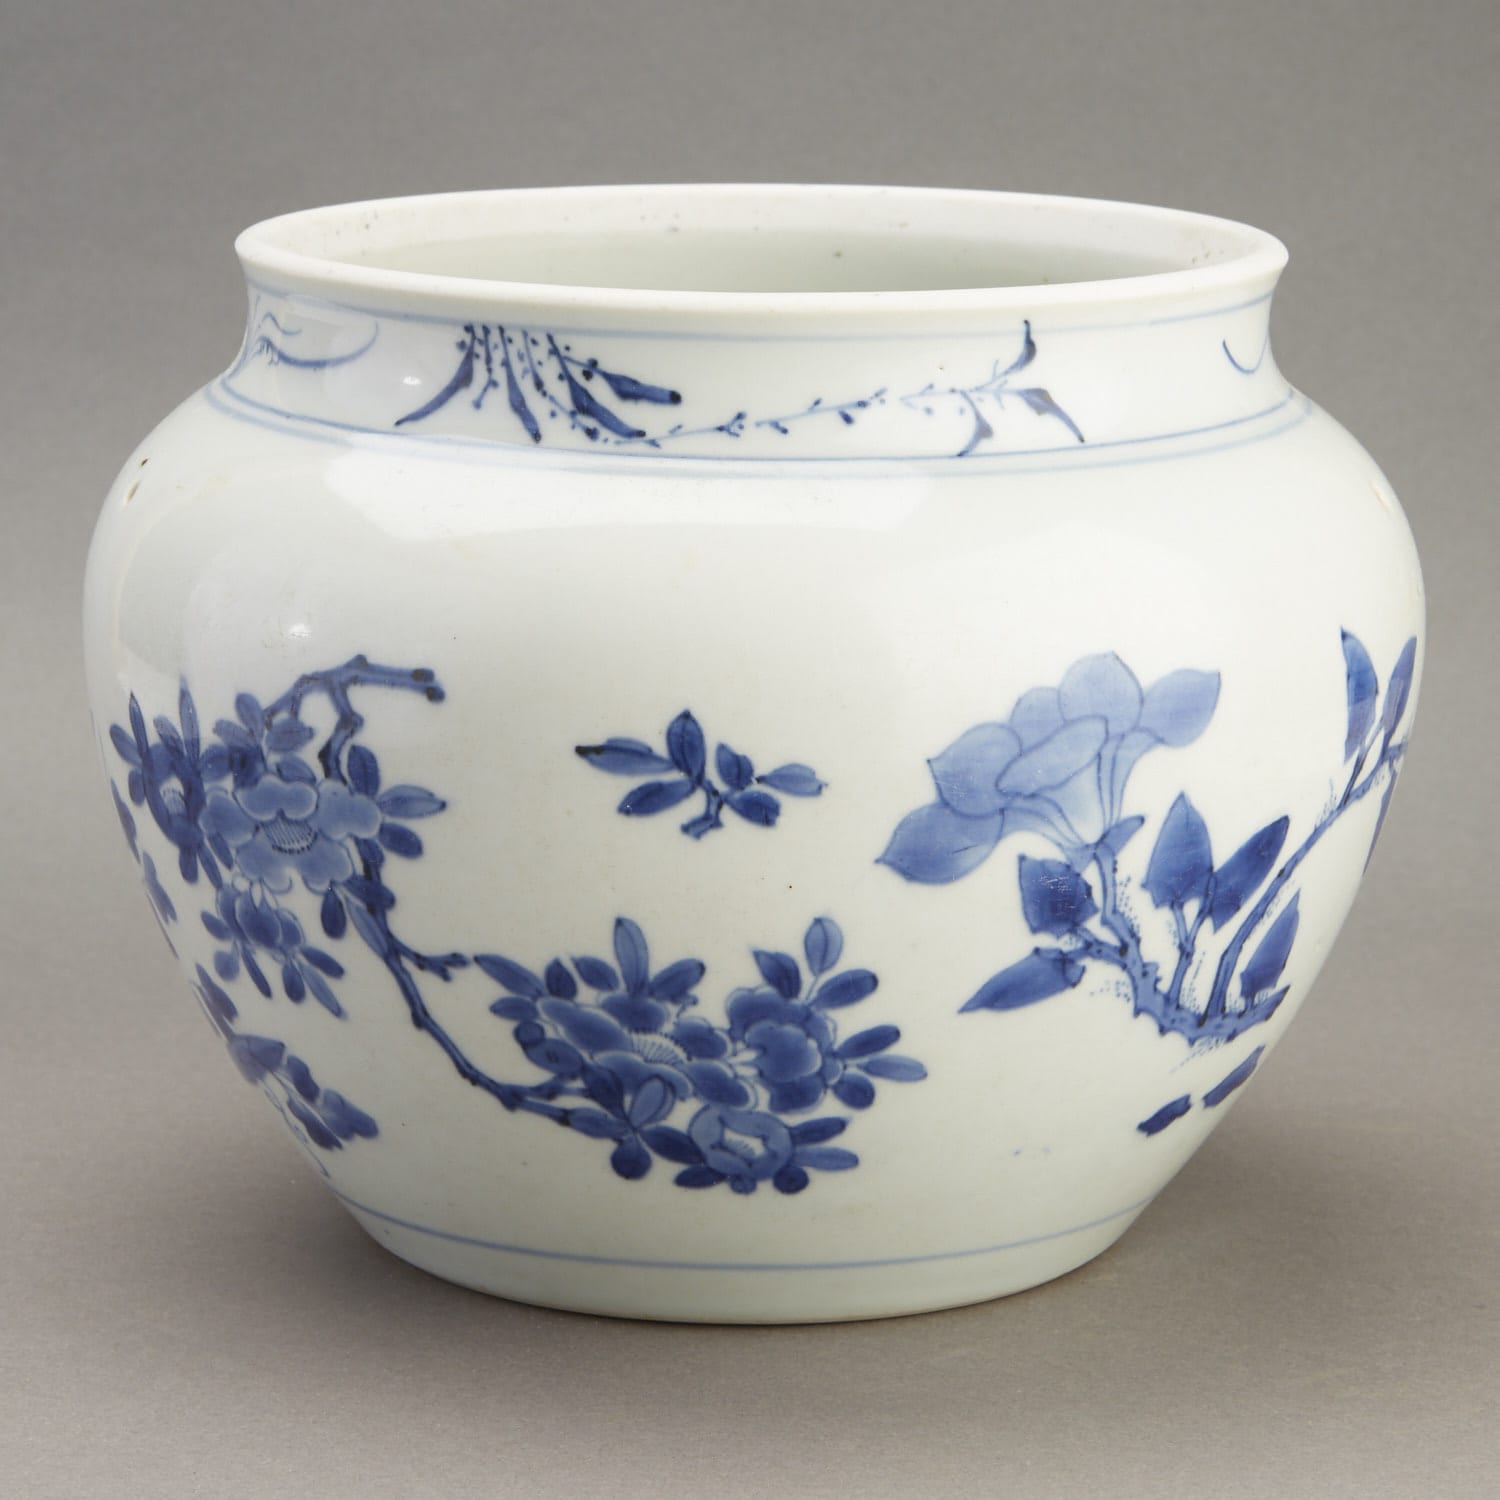 Lot 266: 17/18th c. Chinese Porcelain Jardiniere